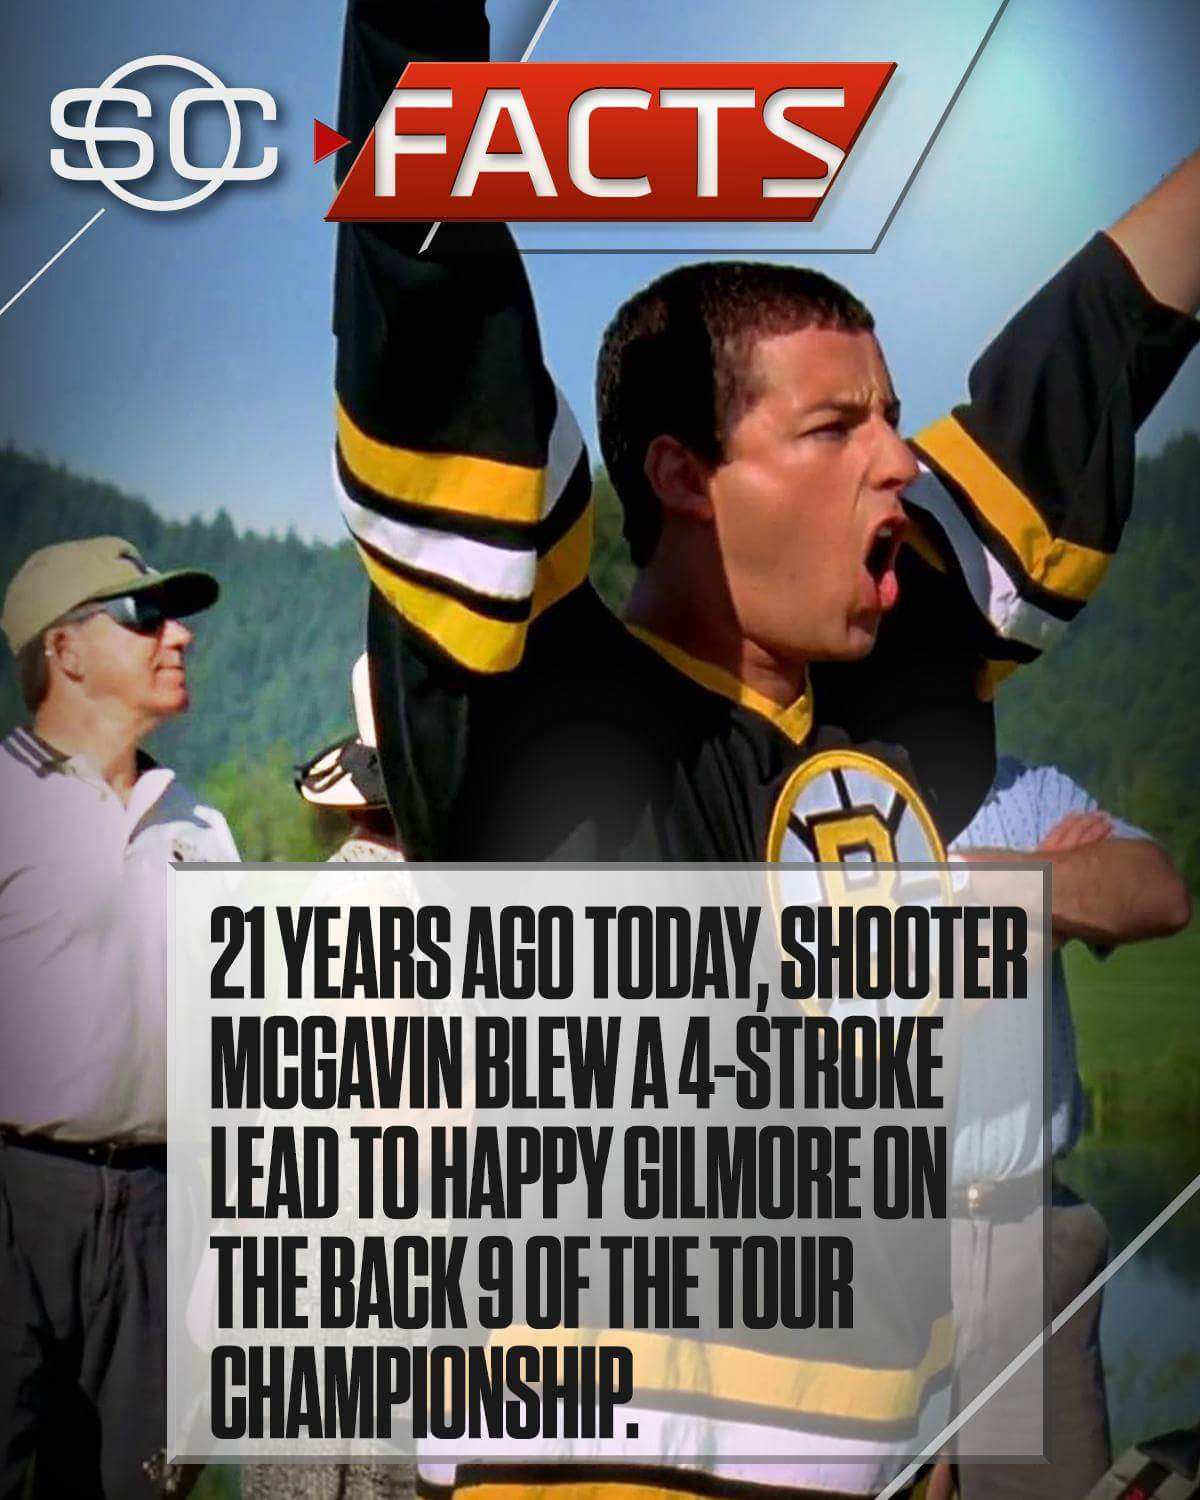 don t let this distract you - 50 Facts 21 Years Ago Today, Shooter Mcgavin Blew A 4Stroke Lead To Happy Gilmore On The Back 9 Of The Tour Championship.